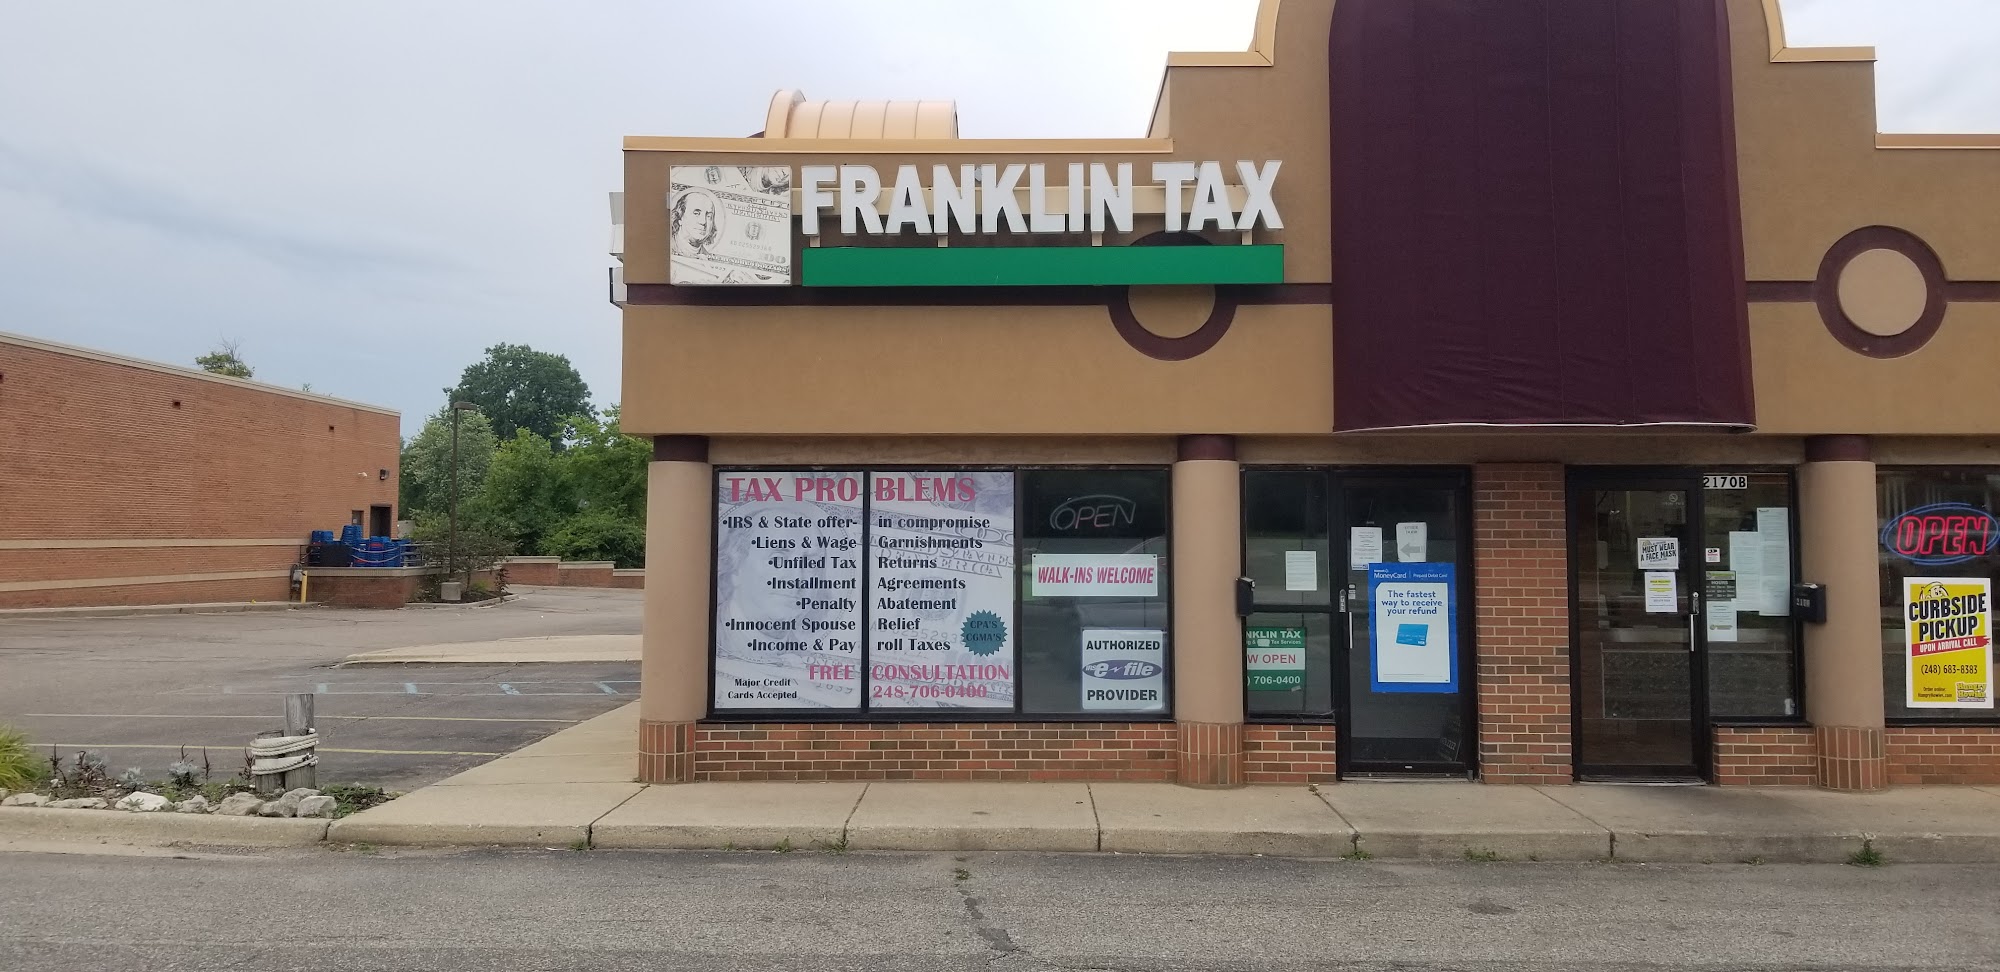 Franklin Tax Accounting & Legal Tax Services 2170 Cass Lake Rd, Keego Harbor Michigan 48320